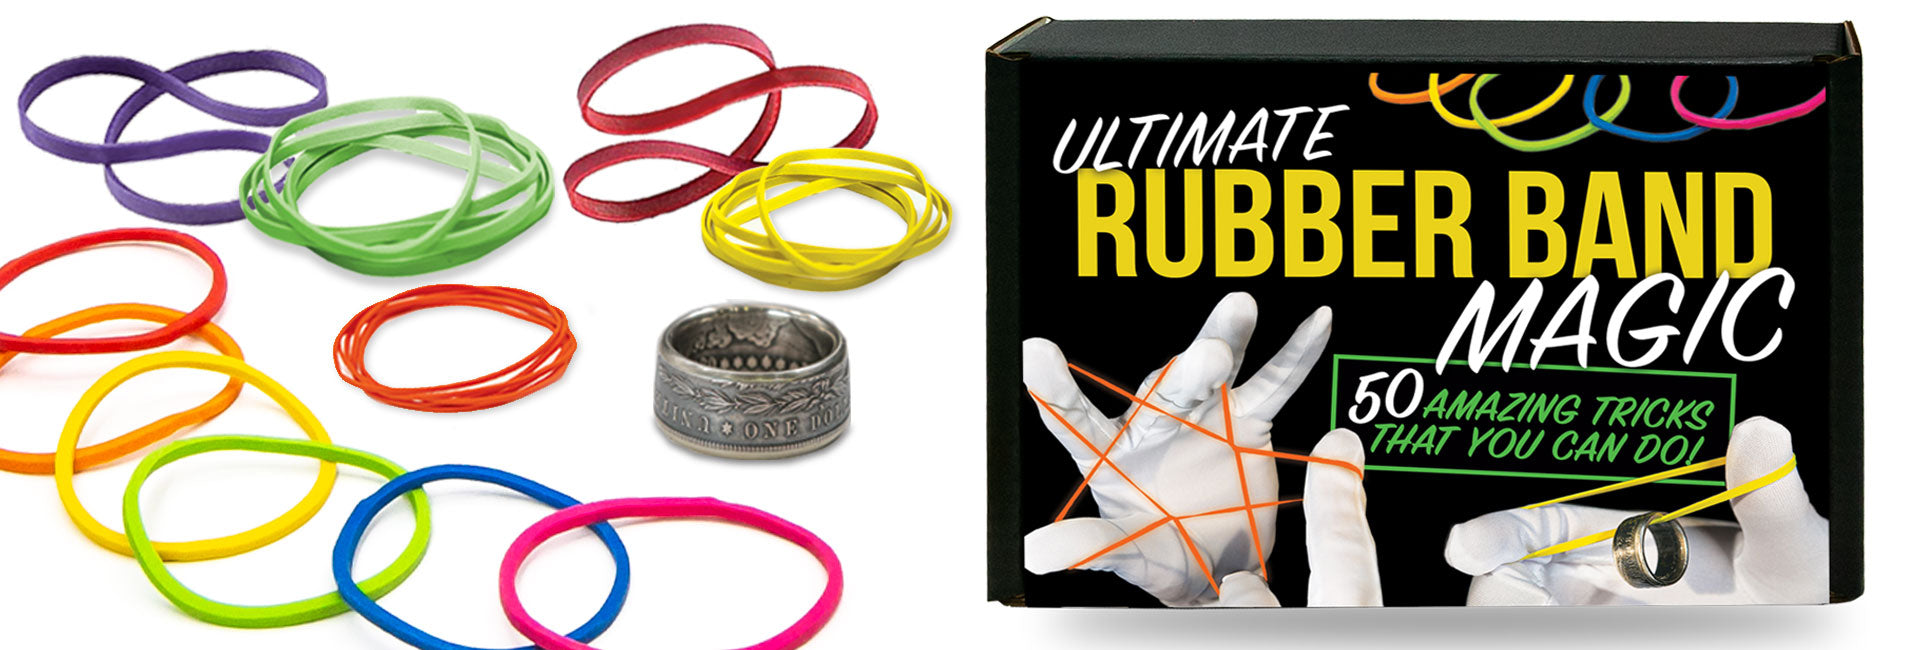 50 Astonishing Magic Tricks with Rubber Bands Kit